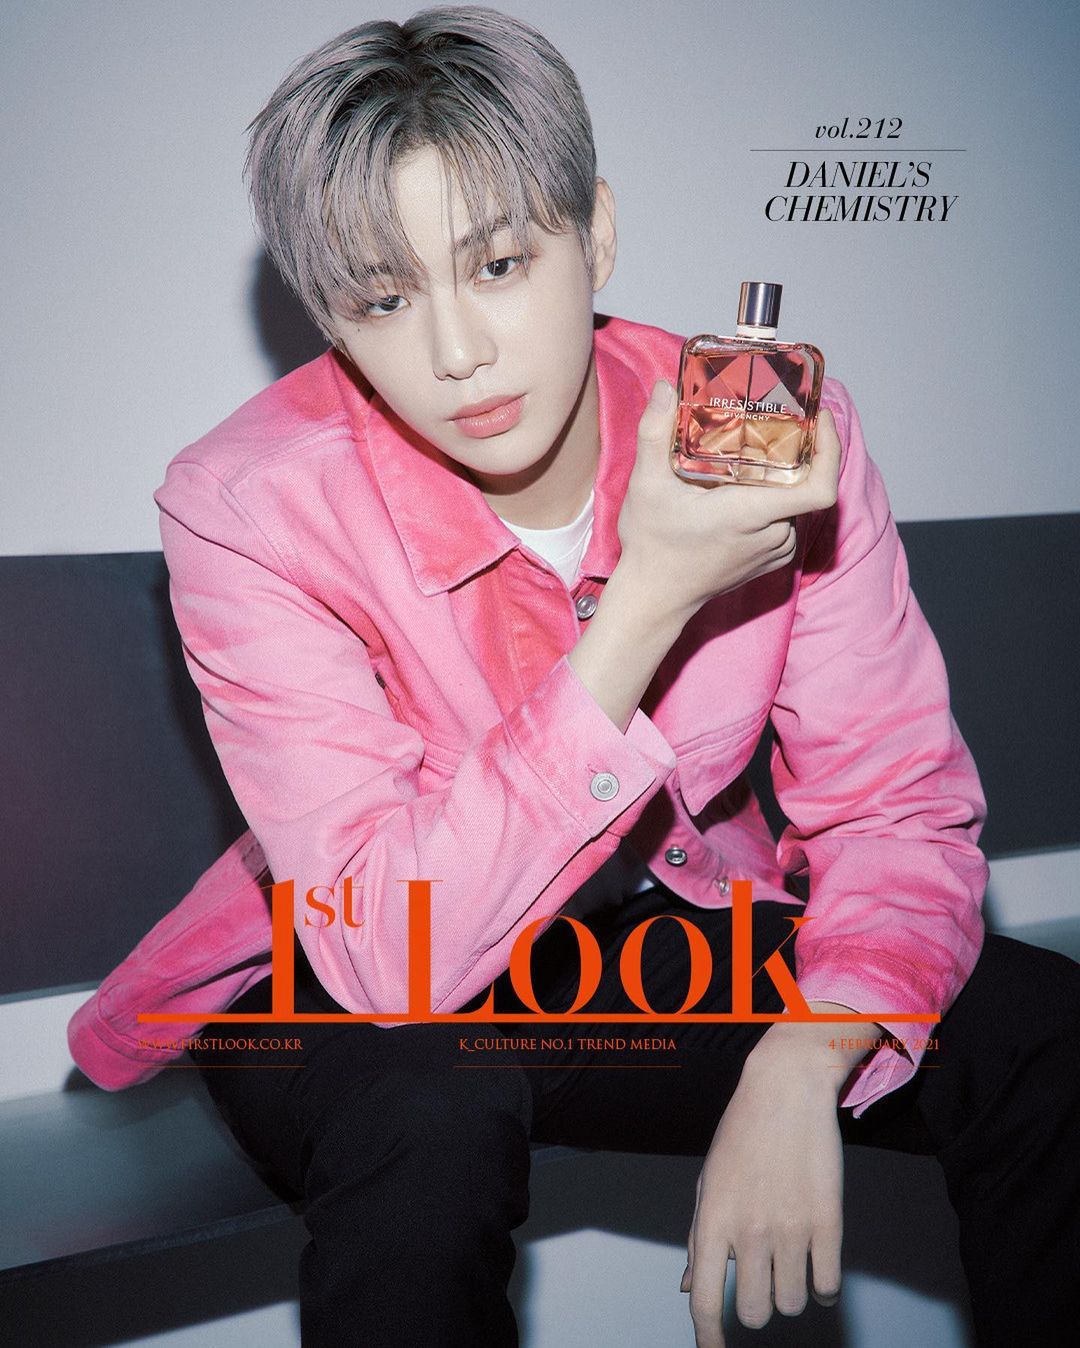  kang-daniel-becomes-new-face-for-givenchy-beauty-perfume-collection